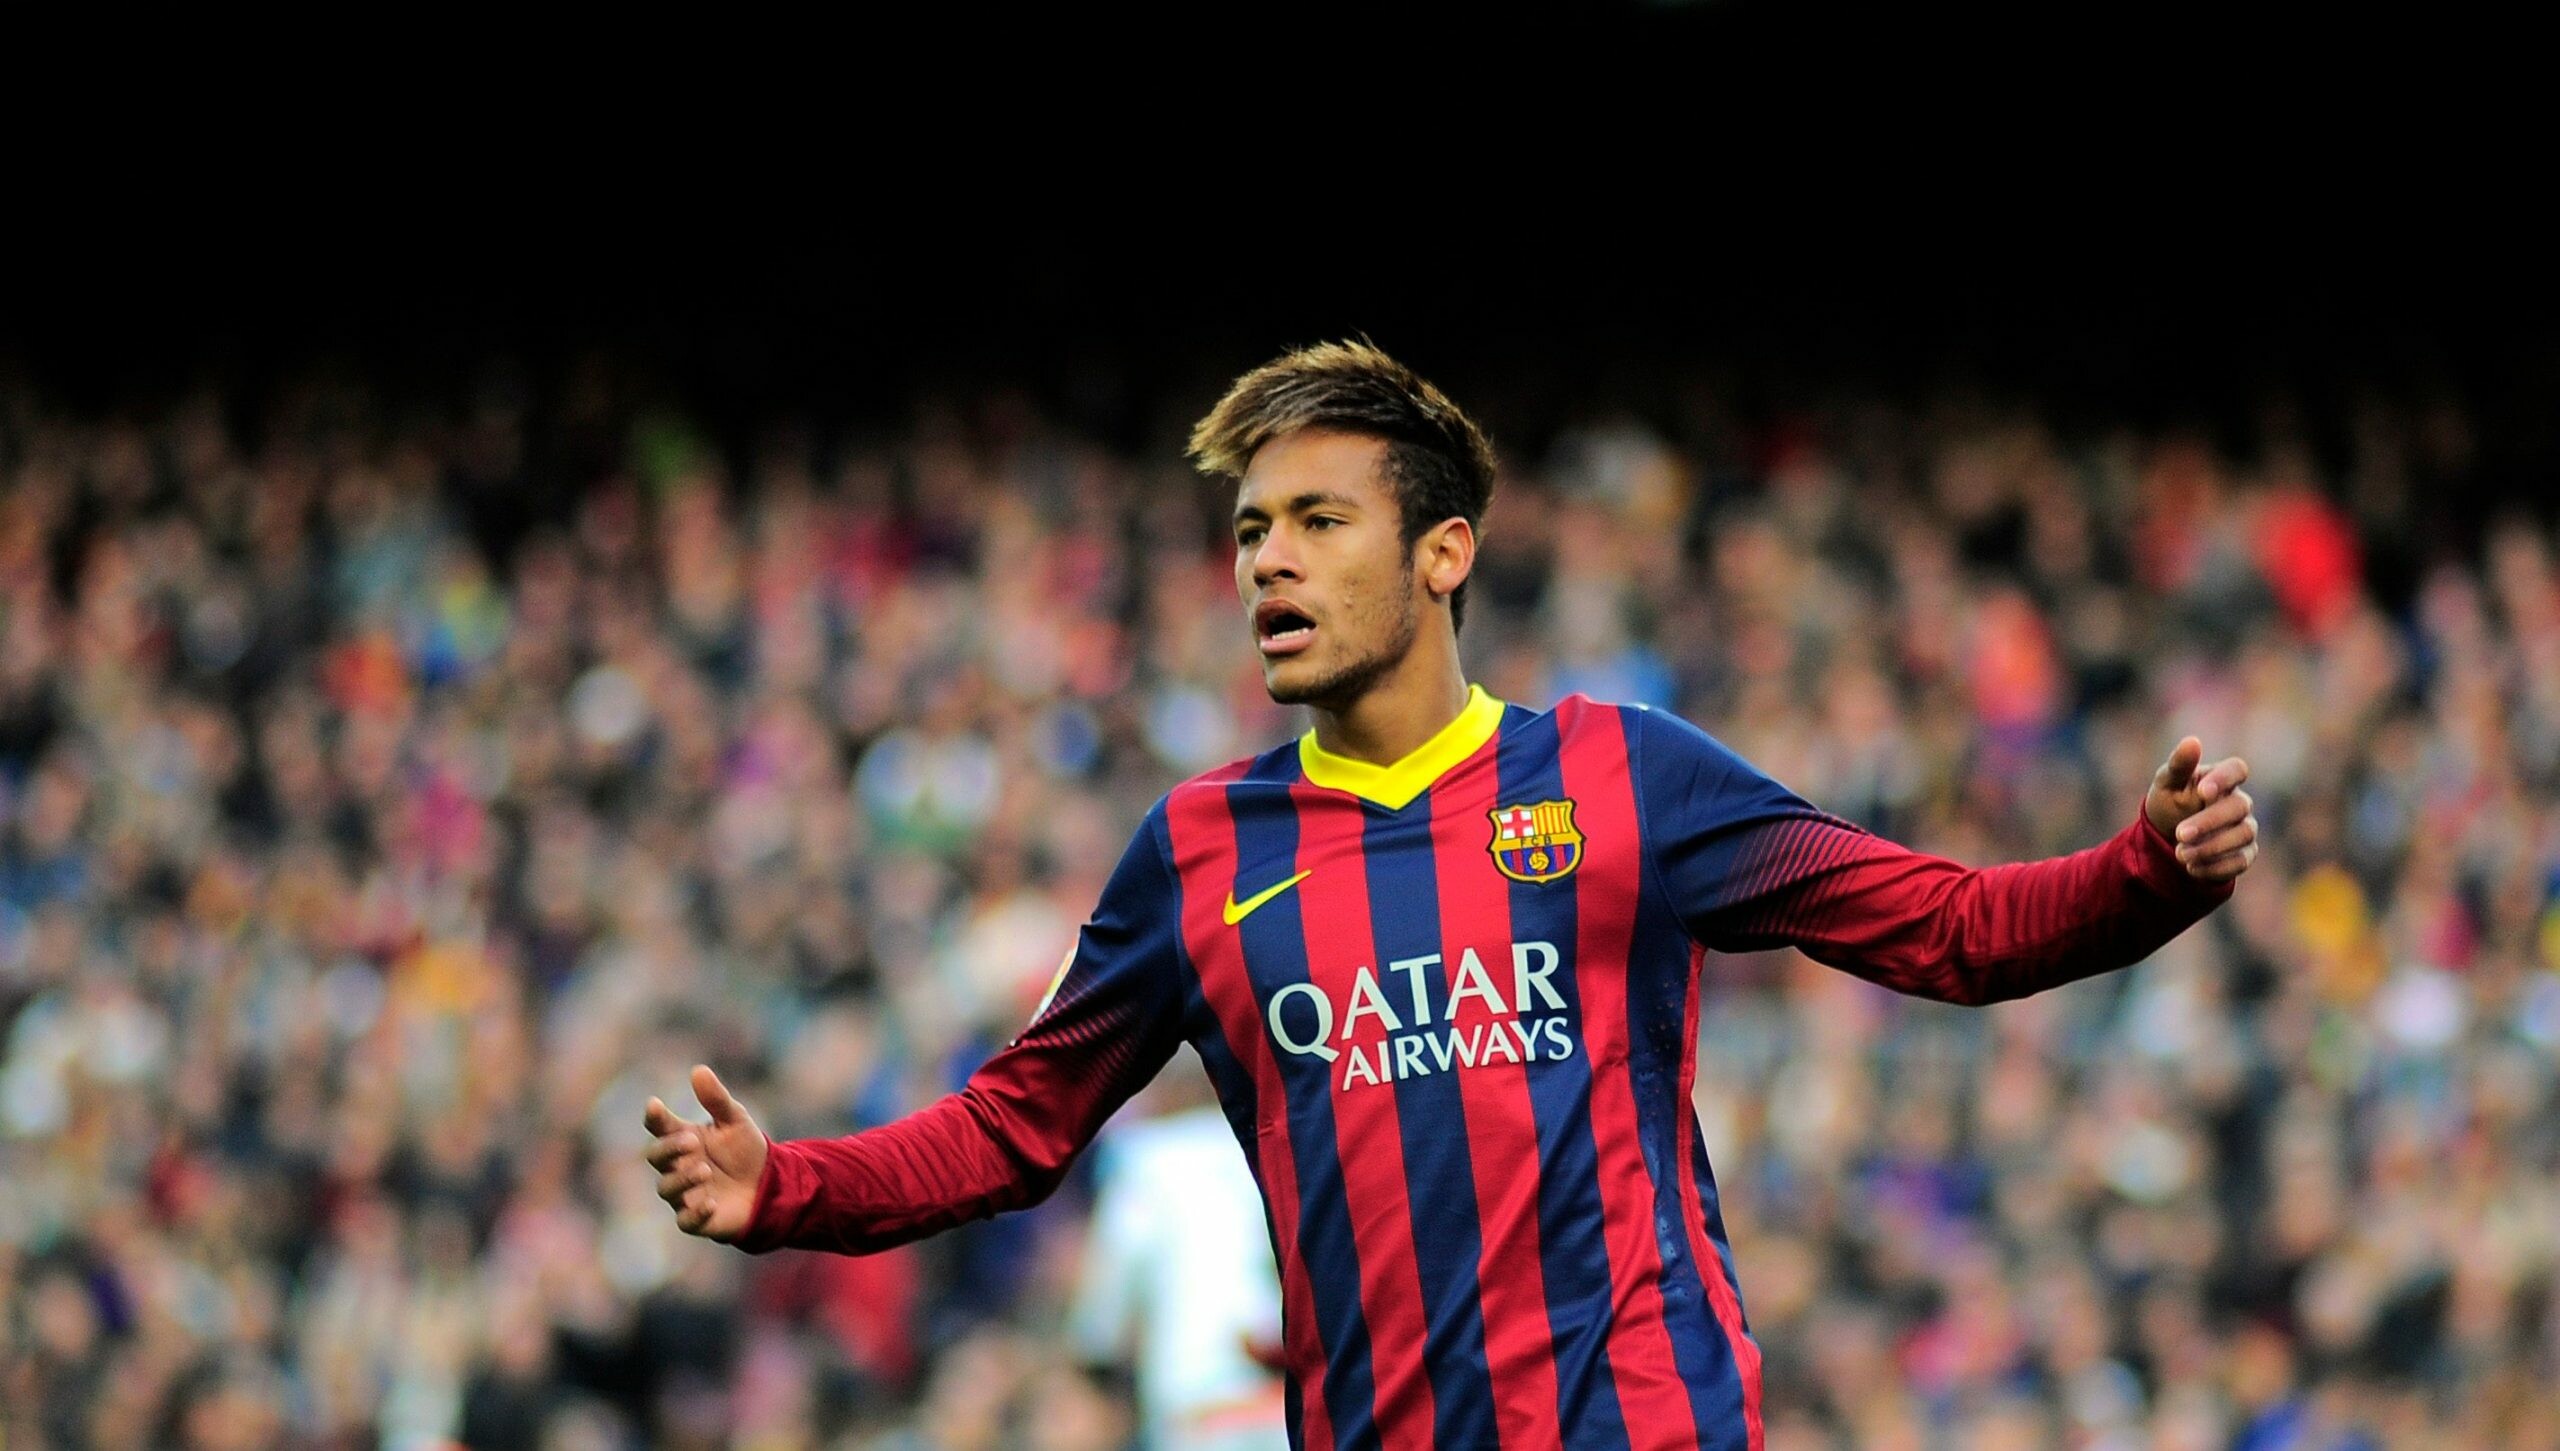 Neymar: He was voted Ligue 1 Player of the Year in his debut season. 2560x1460 HD Wallpaper.